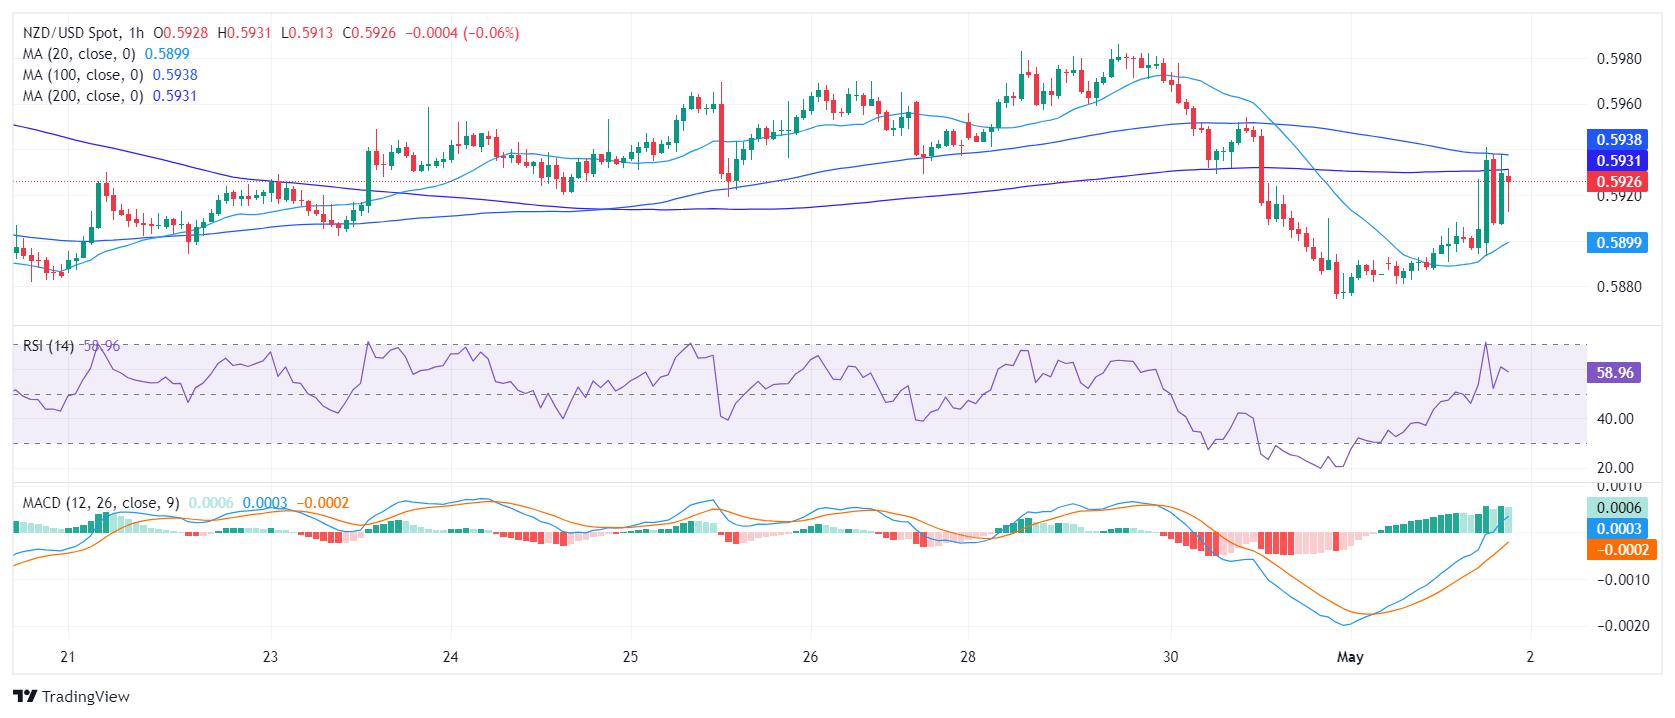 NZD/USD holds gains following Fed’s decision